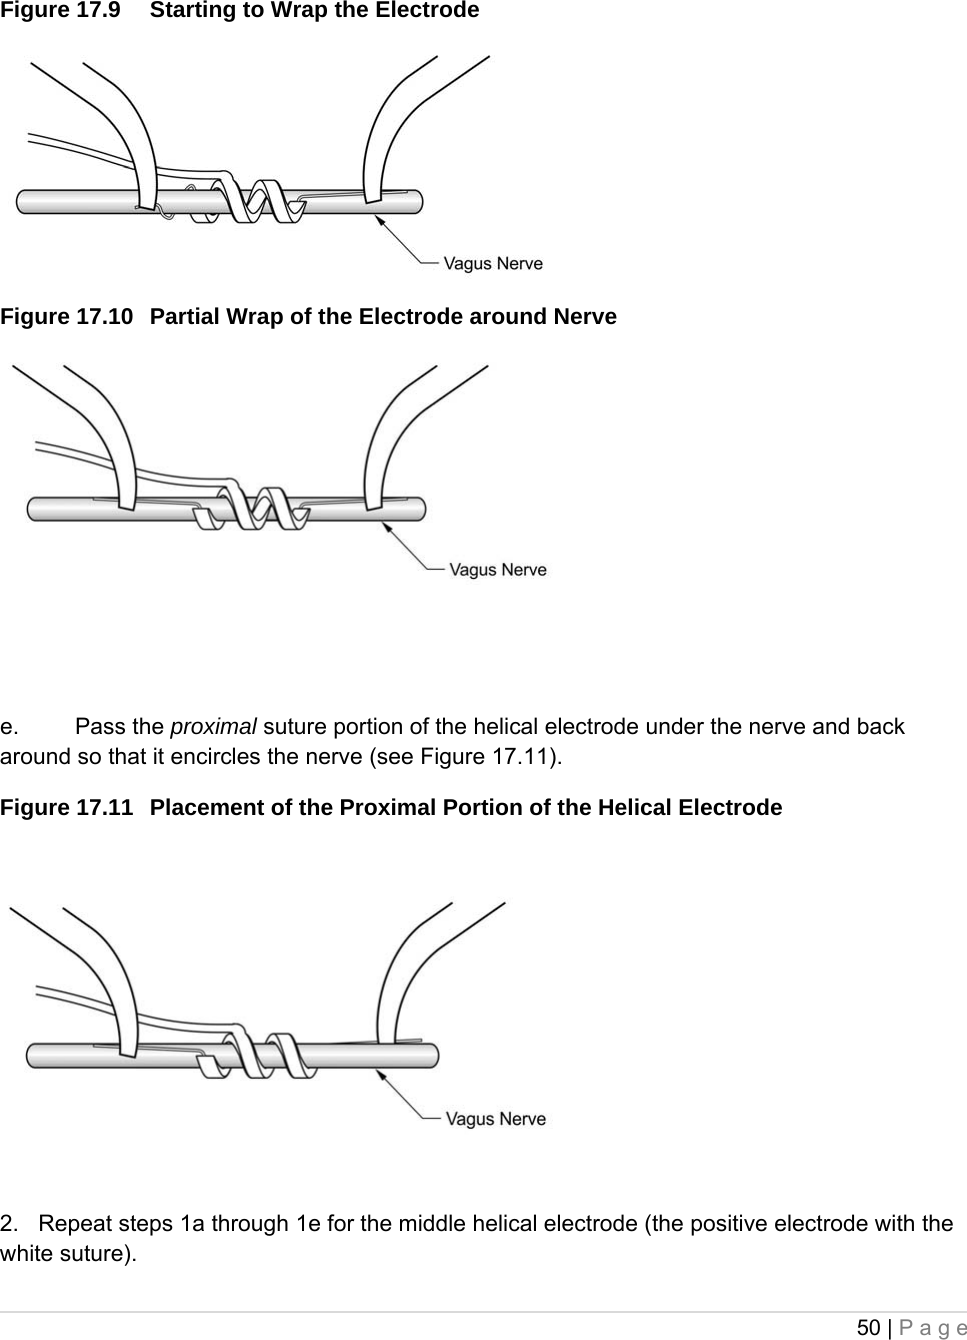 50 | Page   Figure 17.9  Starting to Wrap the Electrode  Figure 17.10  Partial Wrap of the Electrode around Nerve                                 e. Pass the proximal suture portion of the helical electrode under the nerve and back around so that it encircles the nerve (see Figure 17.11). Figure 17.11  Placement of the Proximal Portion of the Helical Electrode    2.   Repeat steps 1a through 1e for the middle helical electrode (the positive electrode with the white suture). 